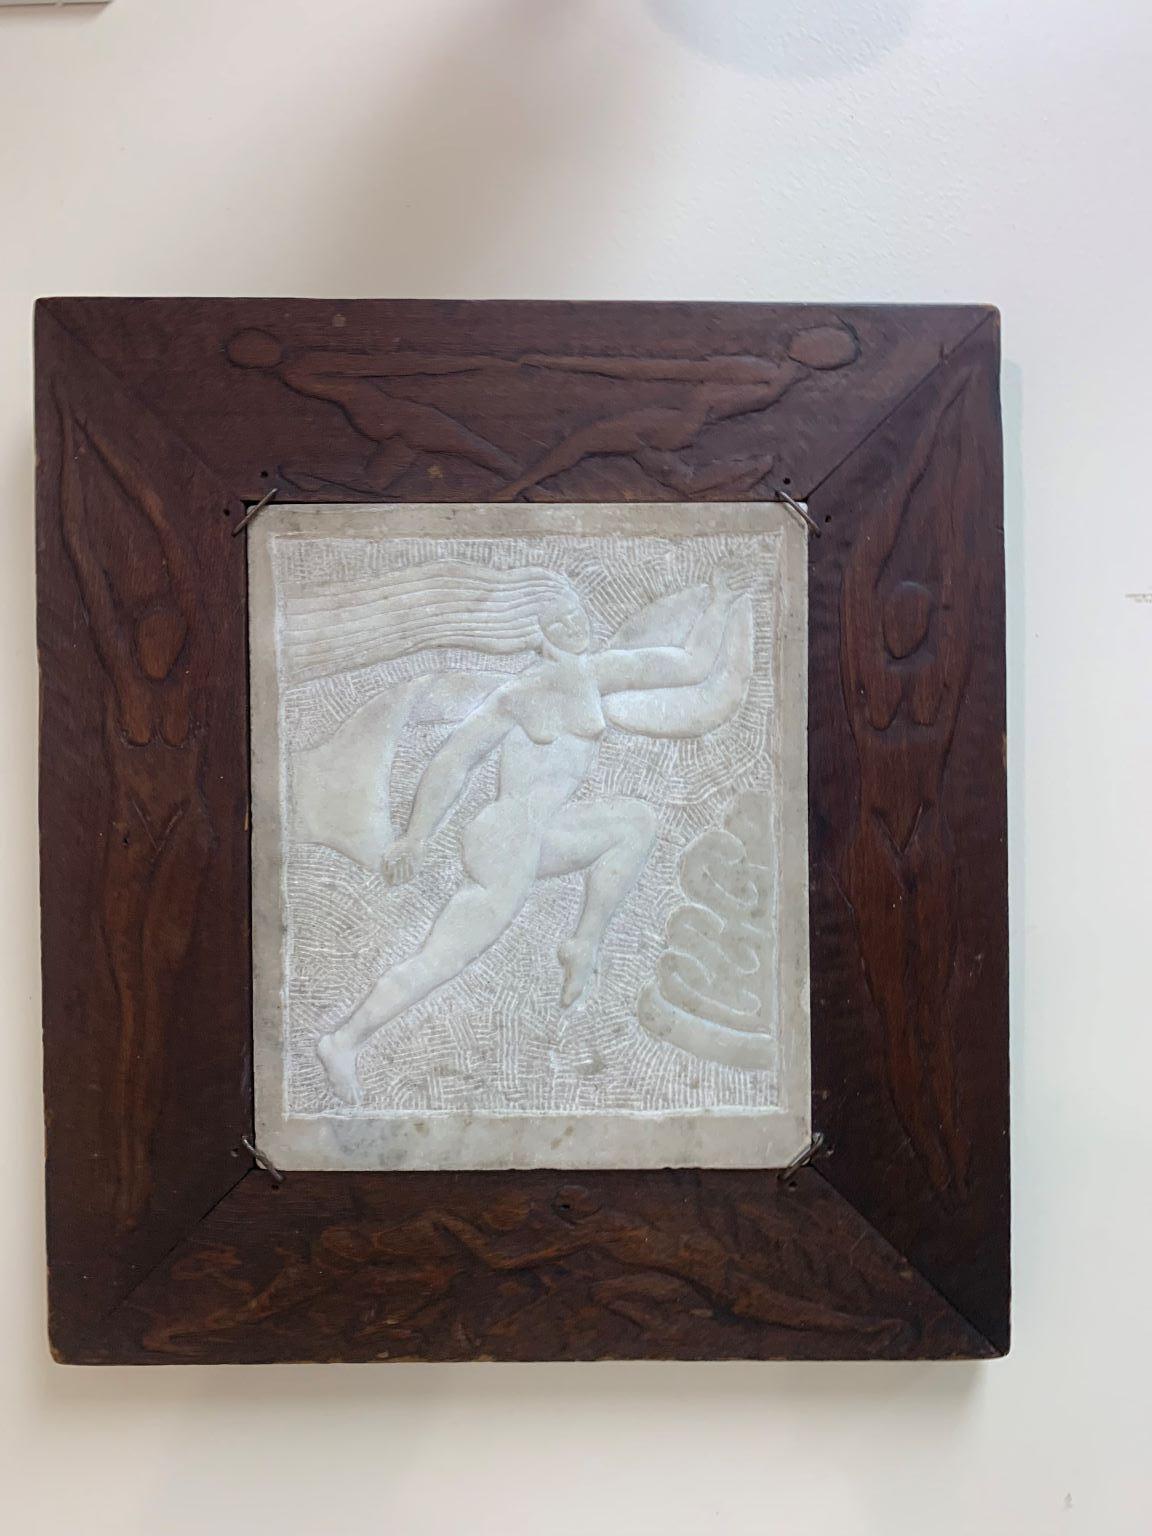 Extraordinary Art Deco carved marble wall plaques signed Knute 1936. Asking price is for both pieces. The subject of the framed plaque is of a female nude. The frame is also delicately hand carved with female nudes as well. The unframed art is of a